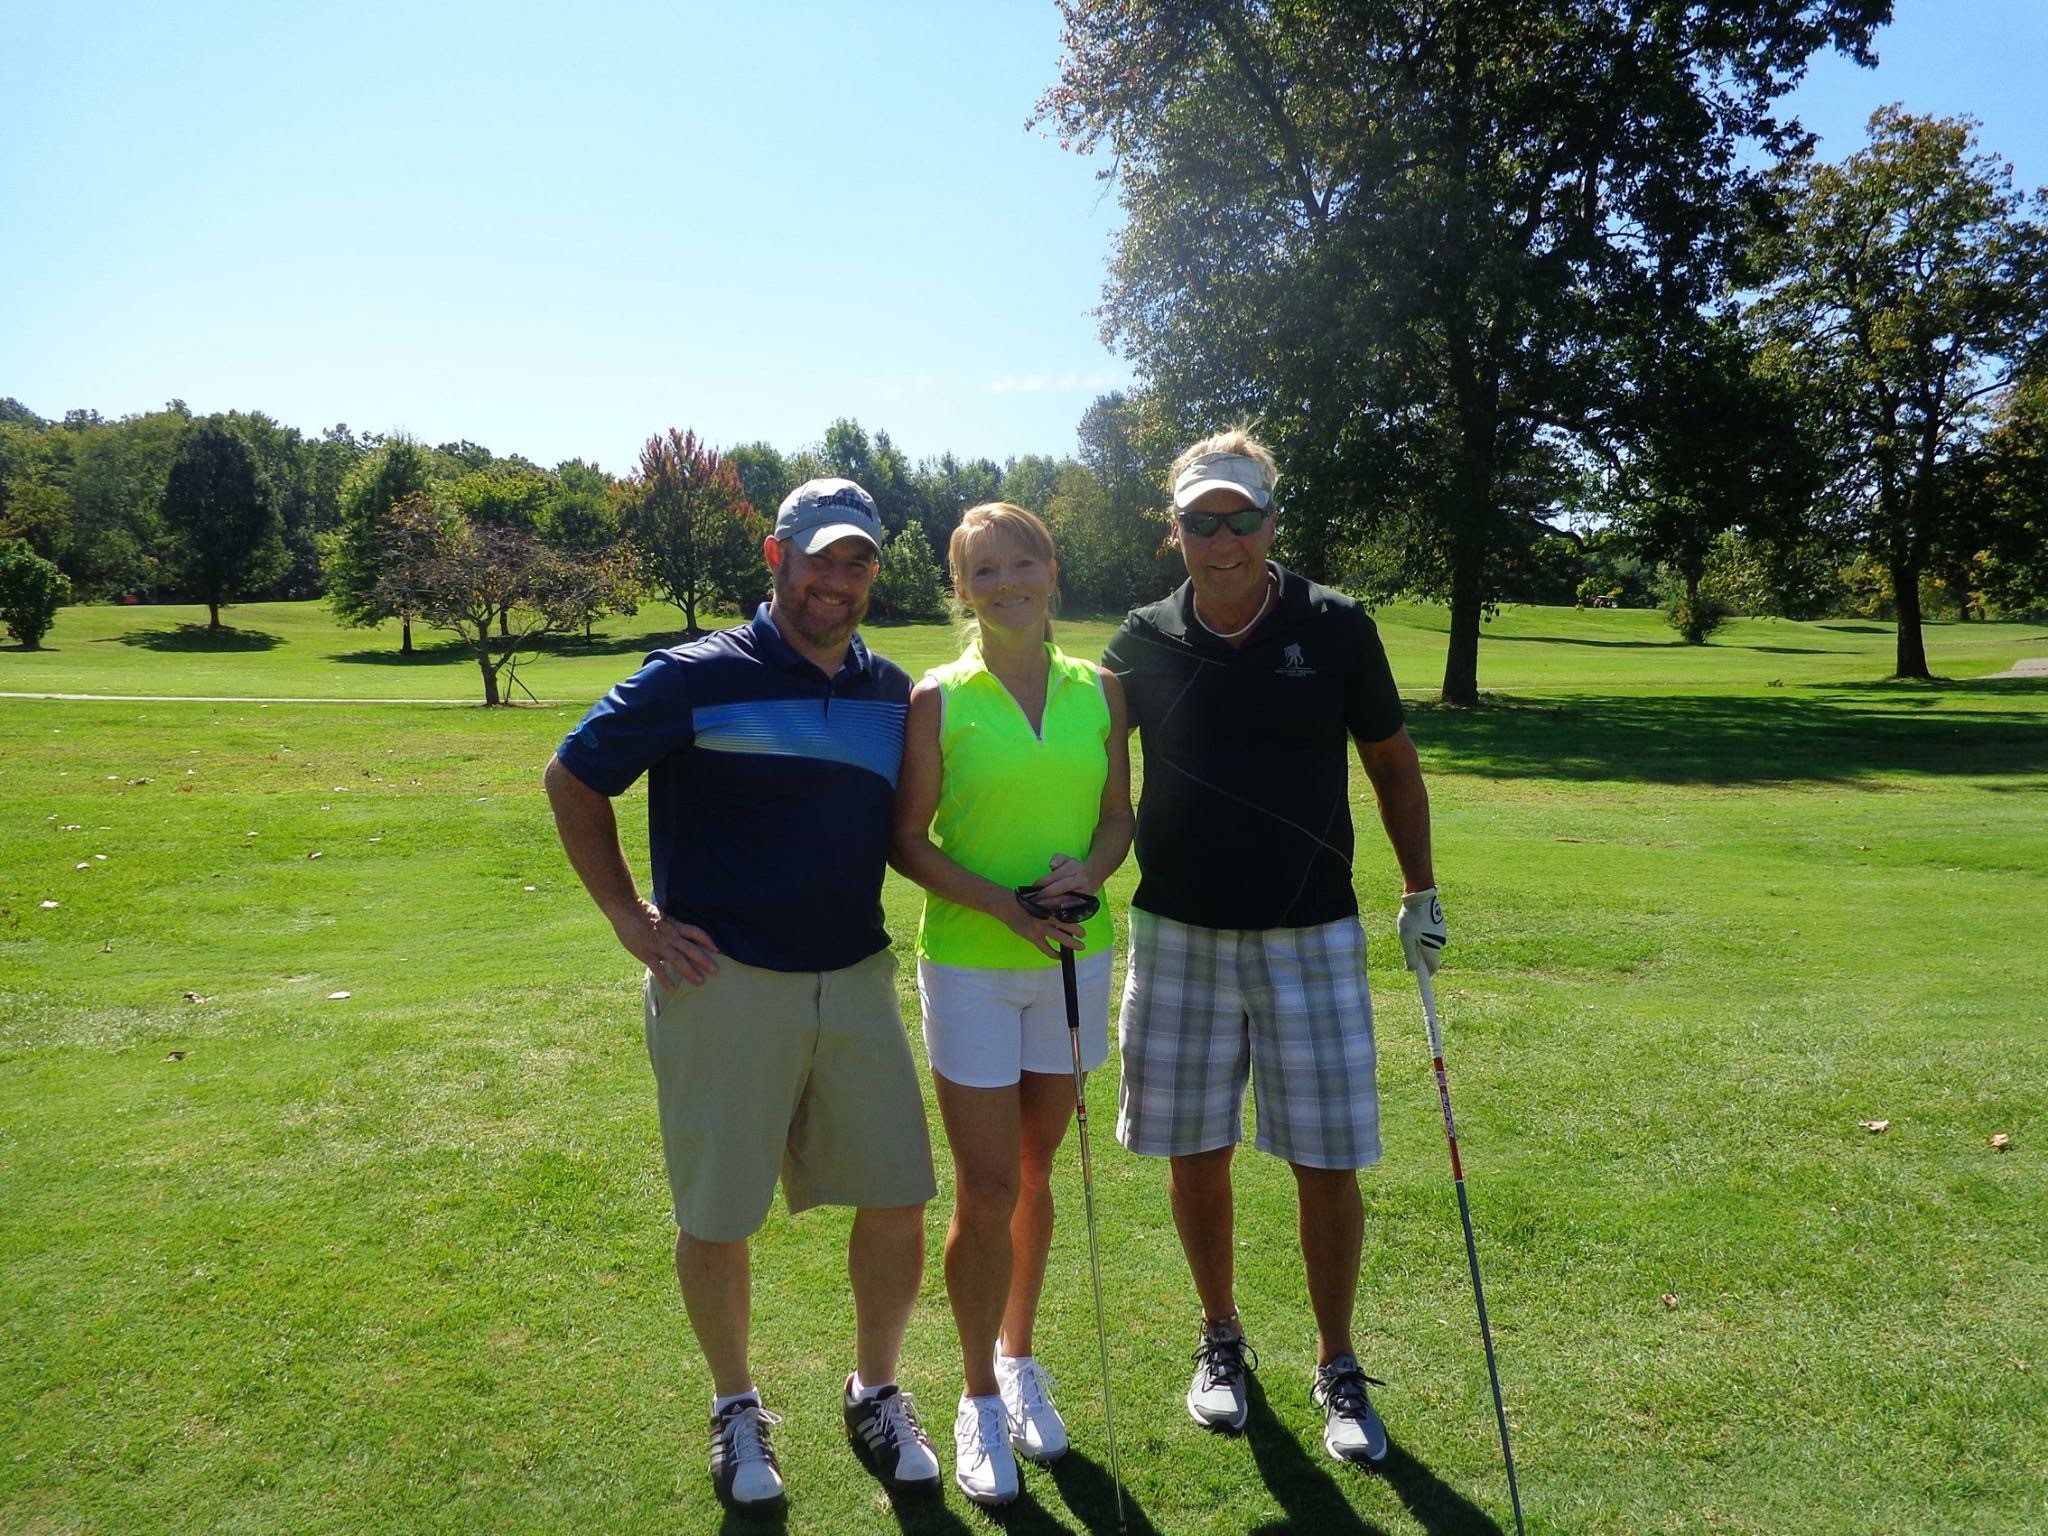 Ted Gobbel, Sally Smith and Lou Baylor at the 2018 Hammertime Golf Scramble